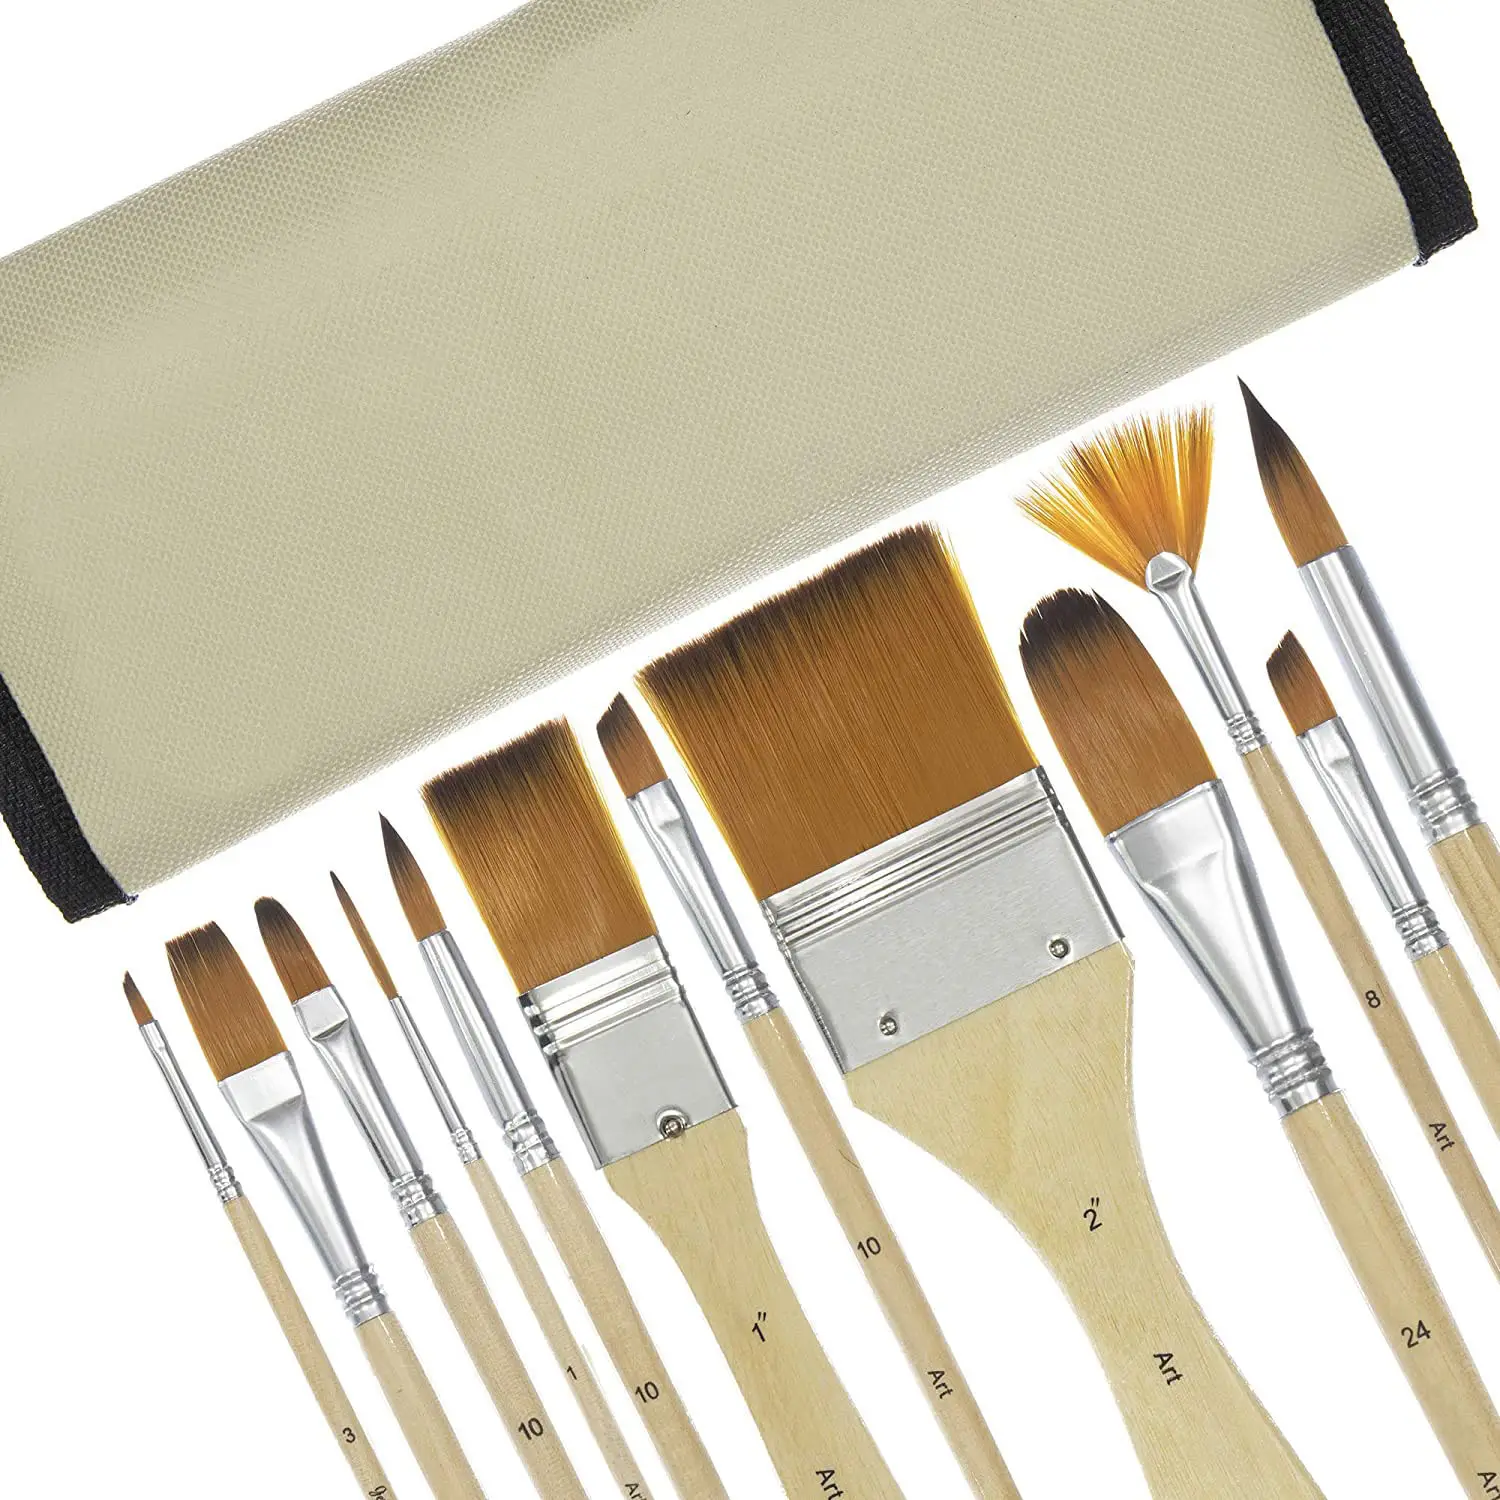 Bview Art 24 Pcs Artist Watercolor Natural Paint Brush Set With Free Carry Pouch